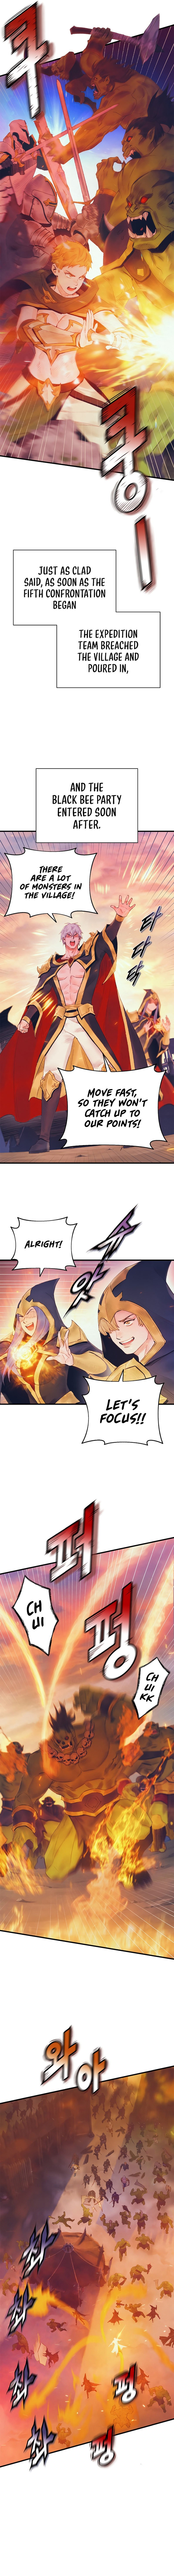 the-healing-priest-of-the-sun-chap-30-2